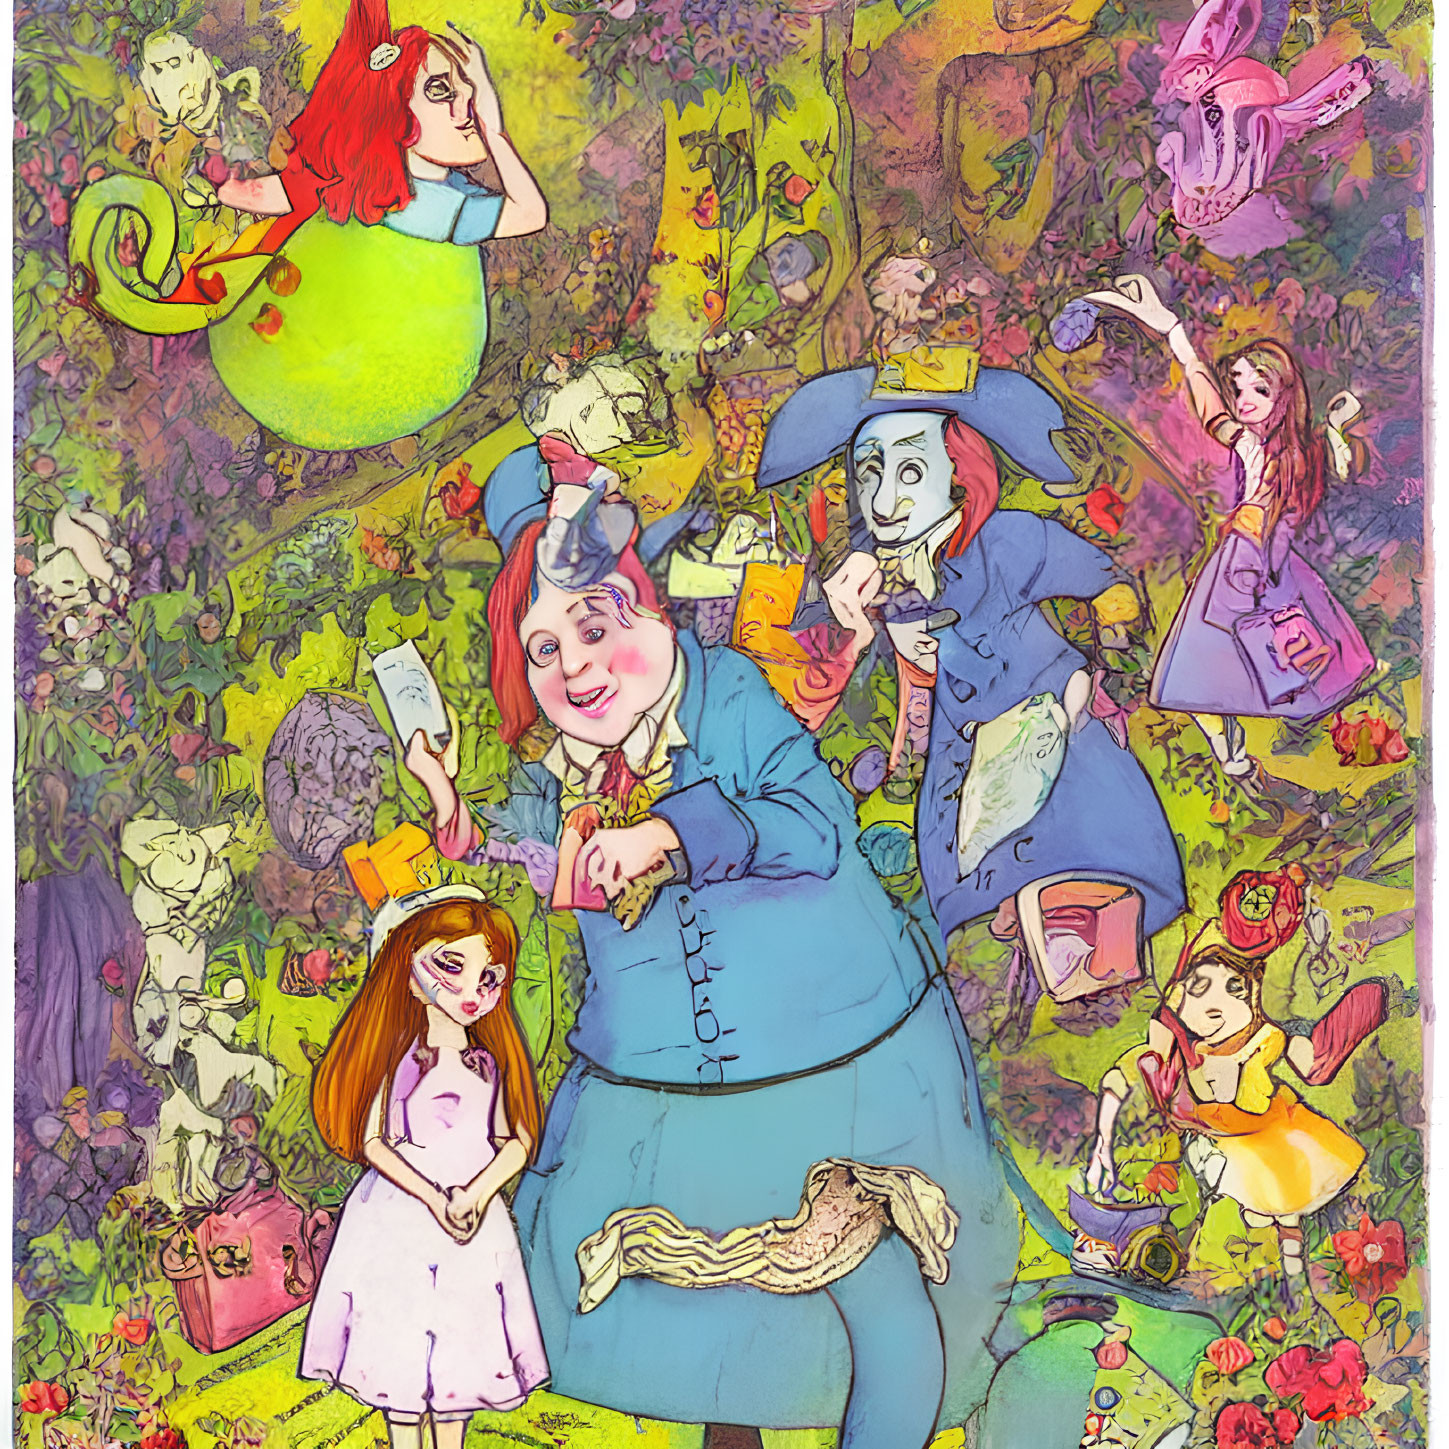 Whimsical Alice in Wonderland characters in colorful illustration